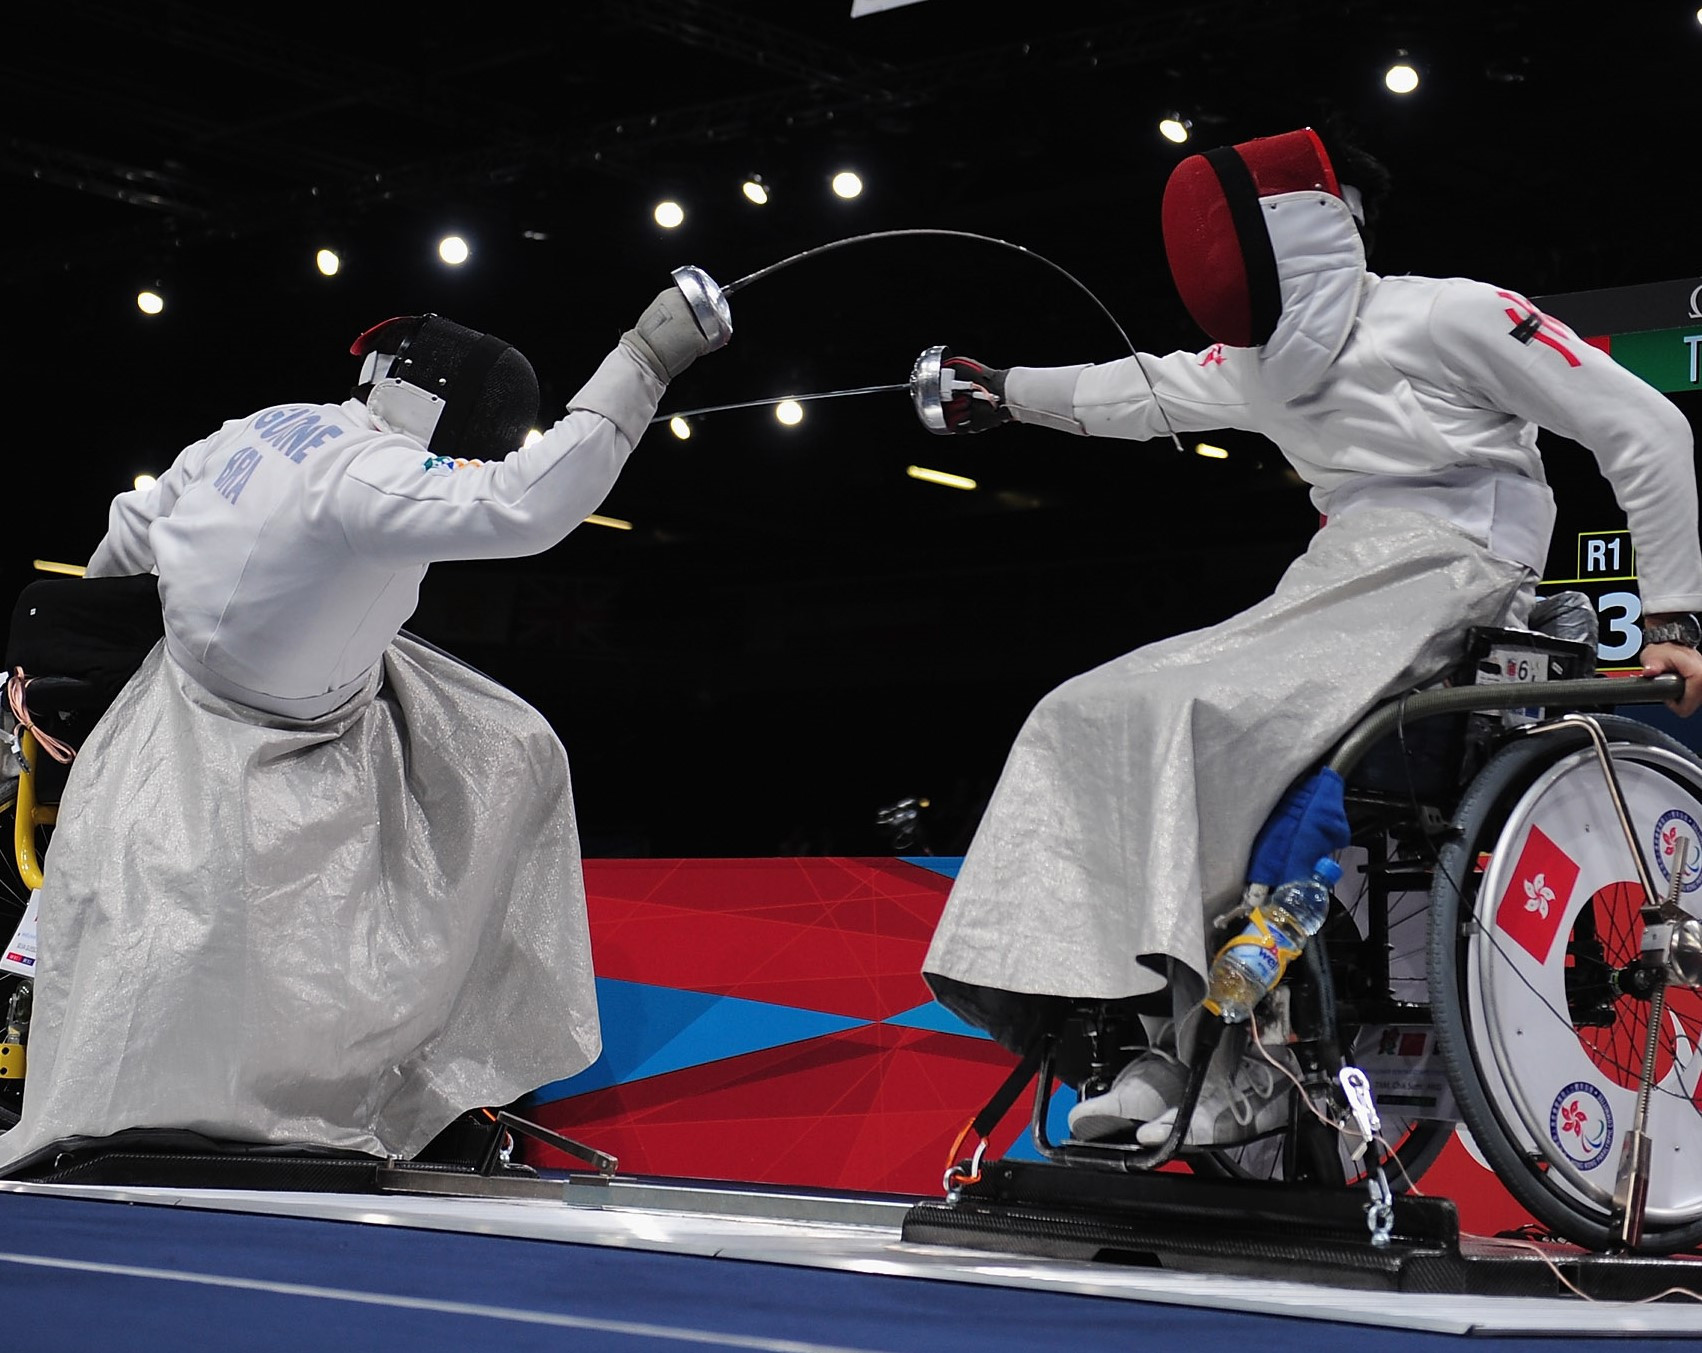 IWAS to stage Under-17 and Under-23 World Fencing Championships in São Paulo